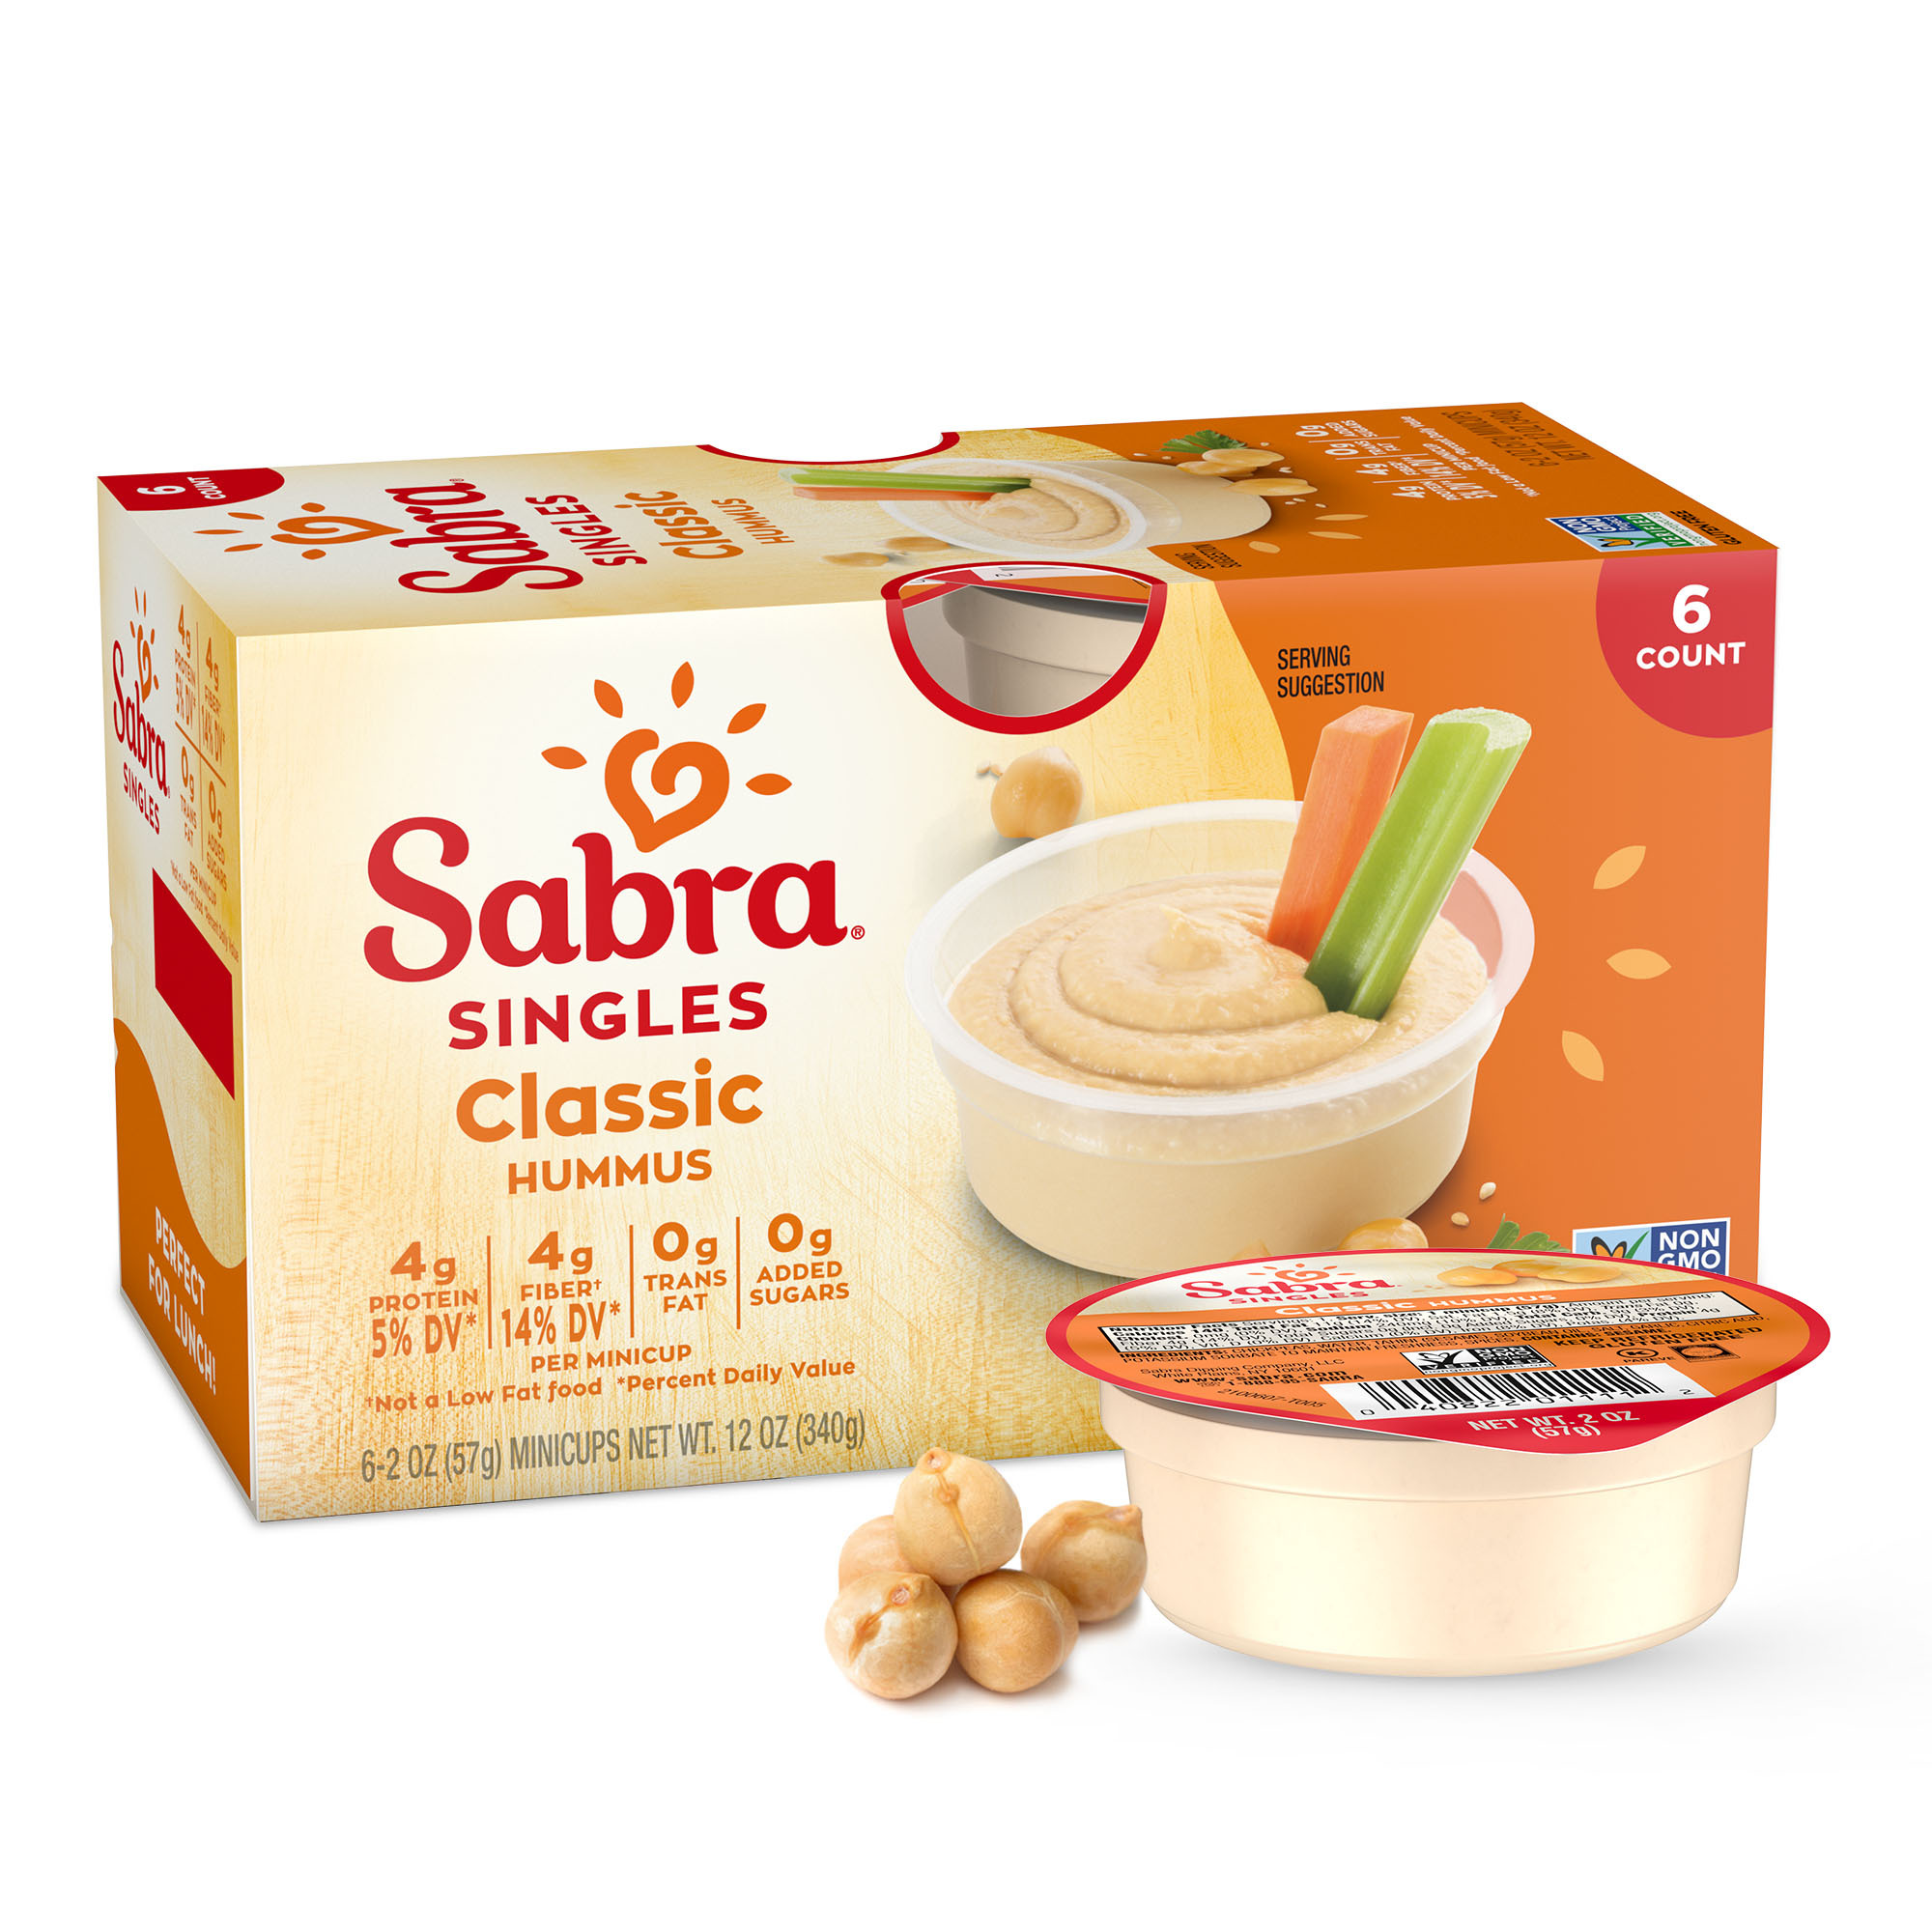 Sabra Classic Hummus Singles, 2 oz Plastic Cups (6 Pack), Gluten-Free, Serving Size 1 minicup (57g) - image 1 of 8